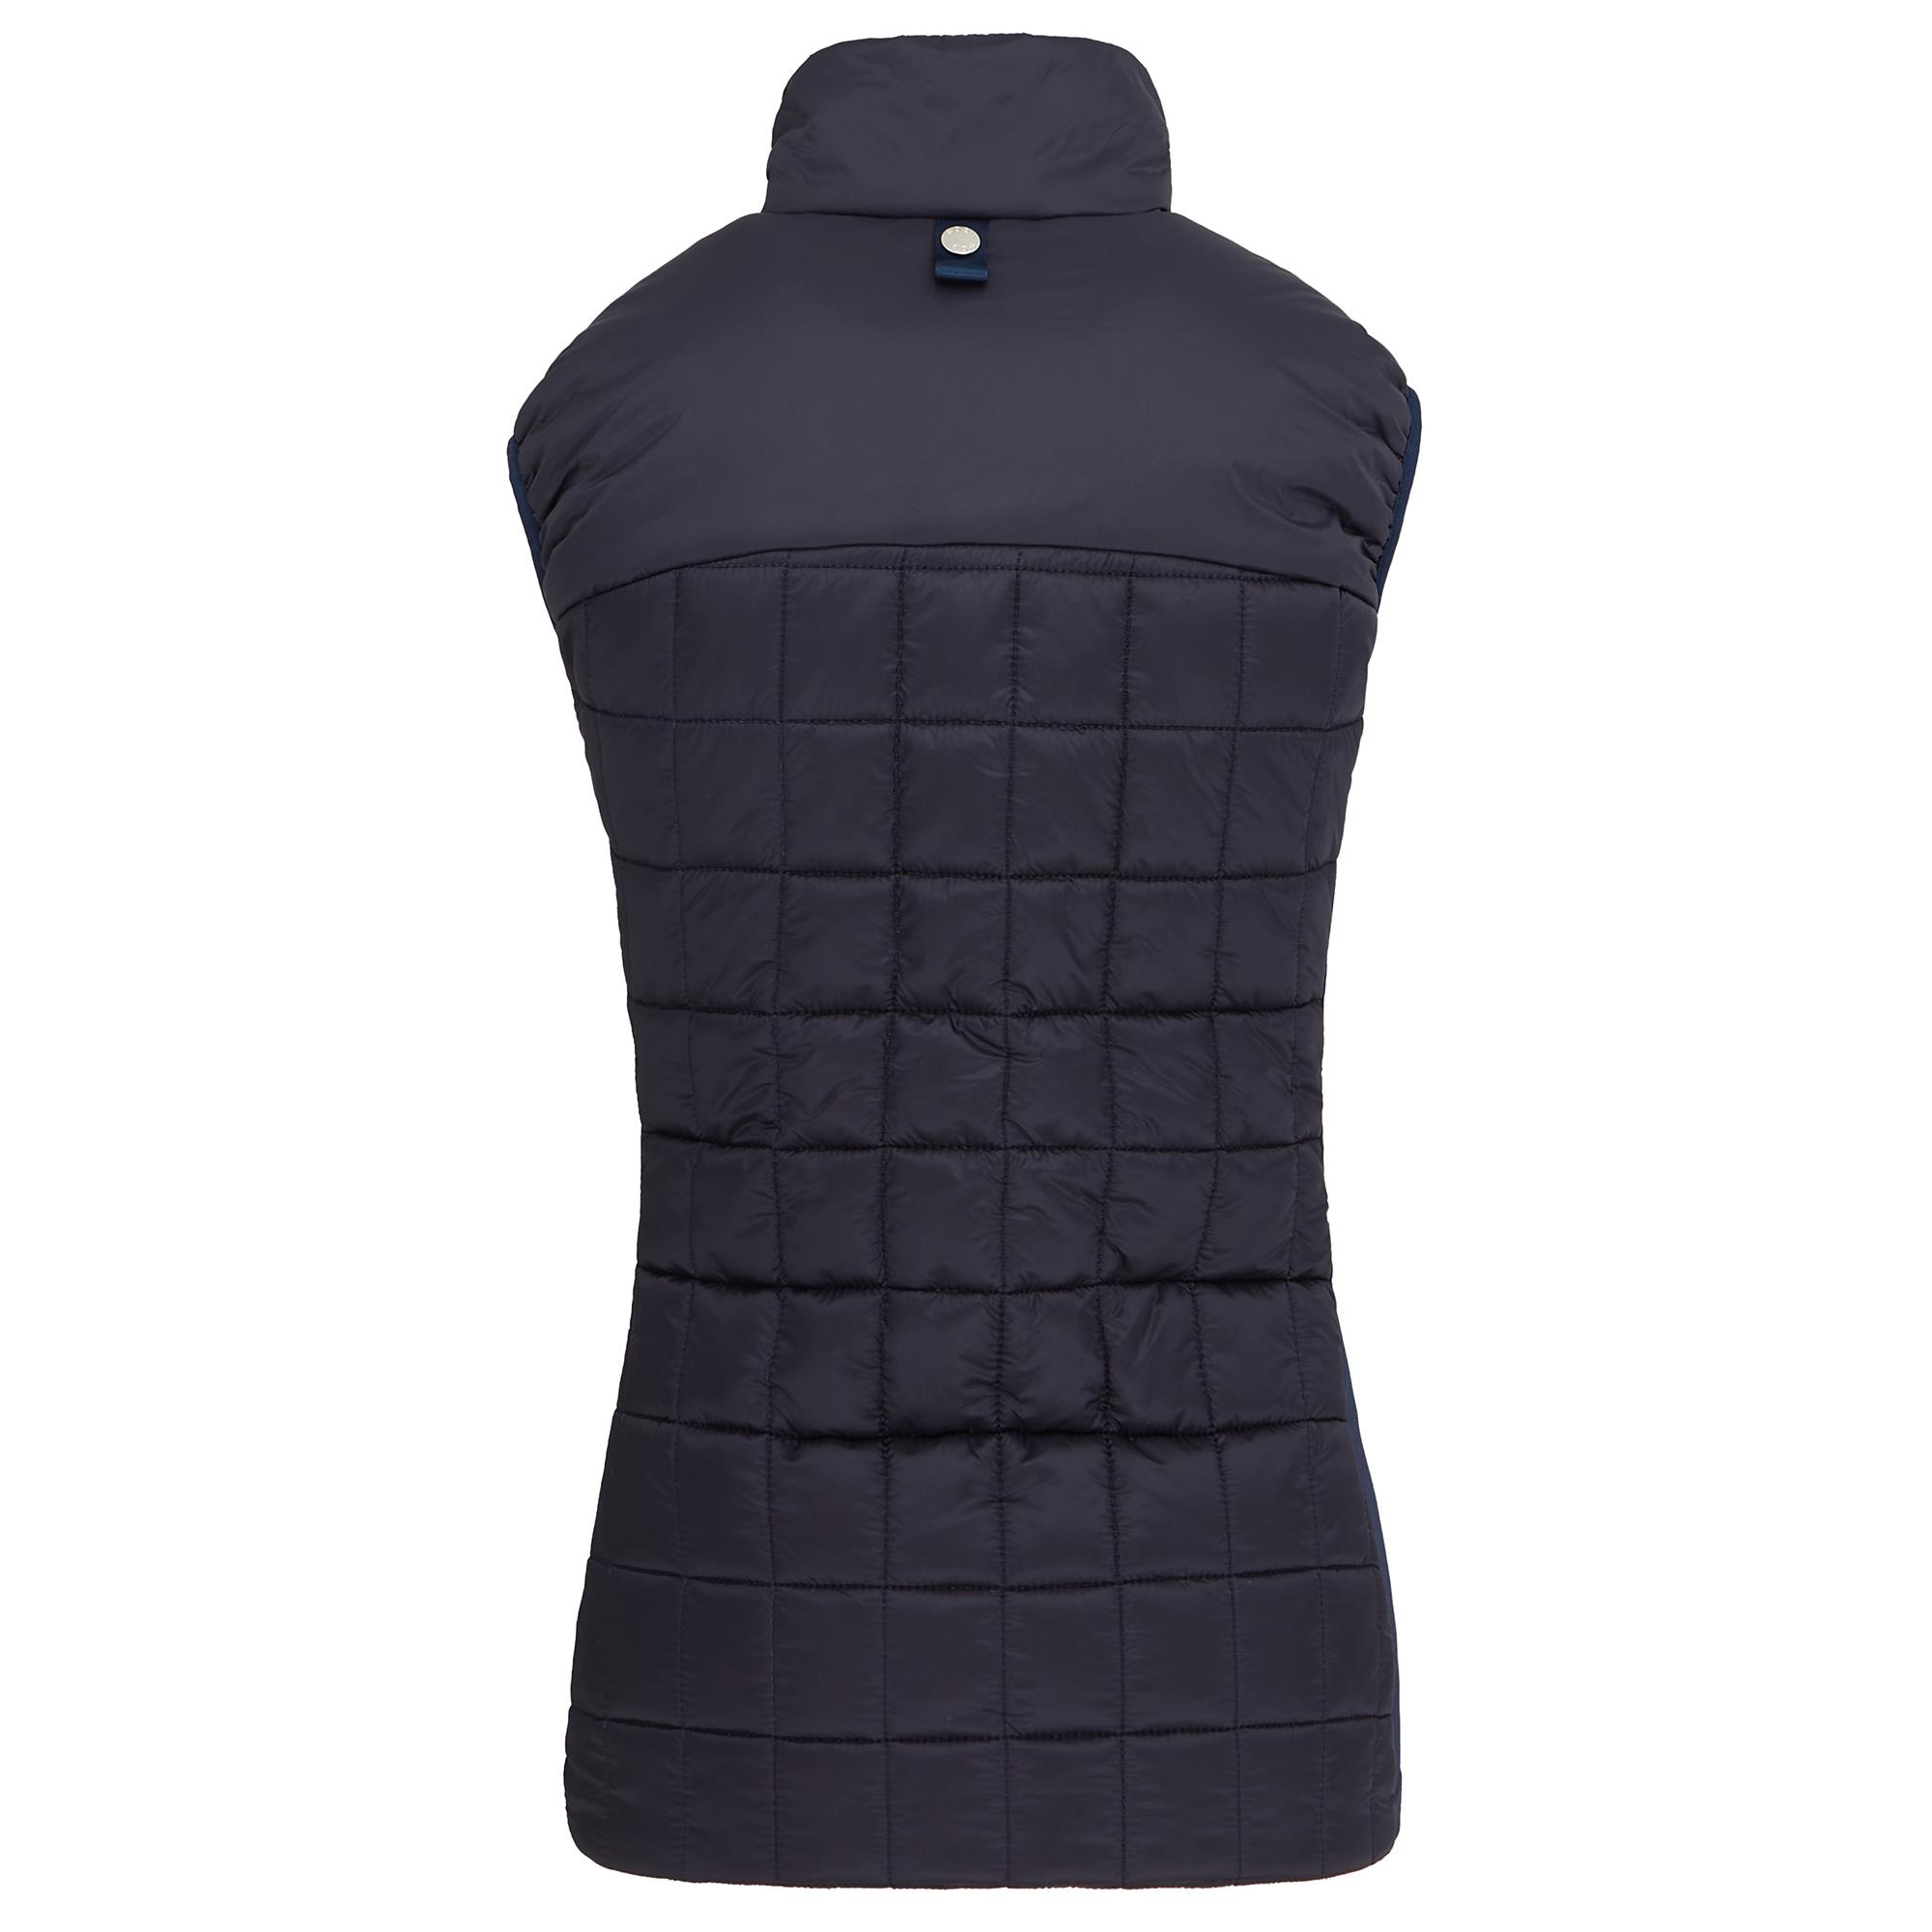 Swing Out Sister Valerie Active Ladies Golf Vest Navy